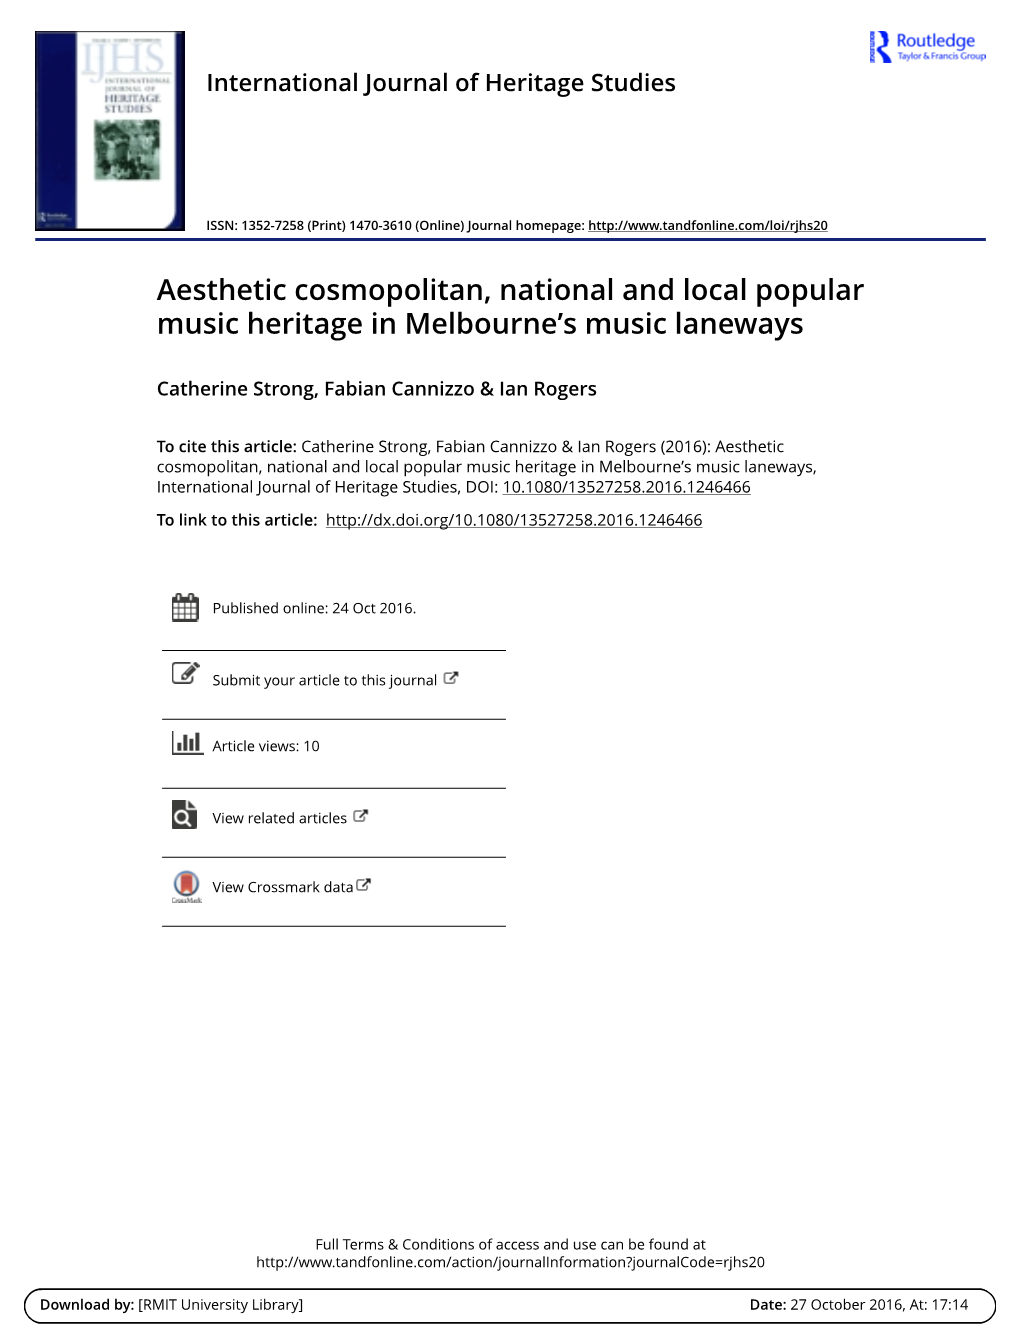 Aesthetic Cosmopolitan, National and Local Popular Music Heritage in Melbourne's Music Laneways